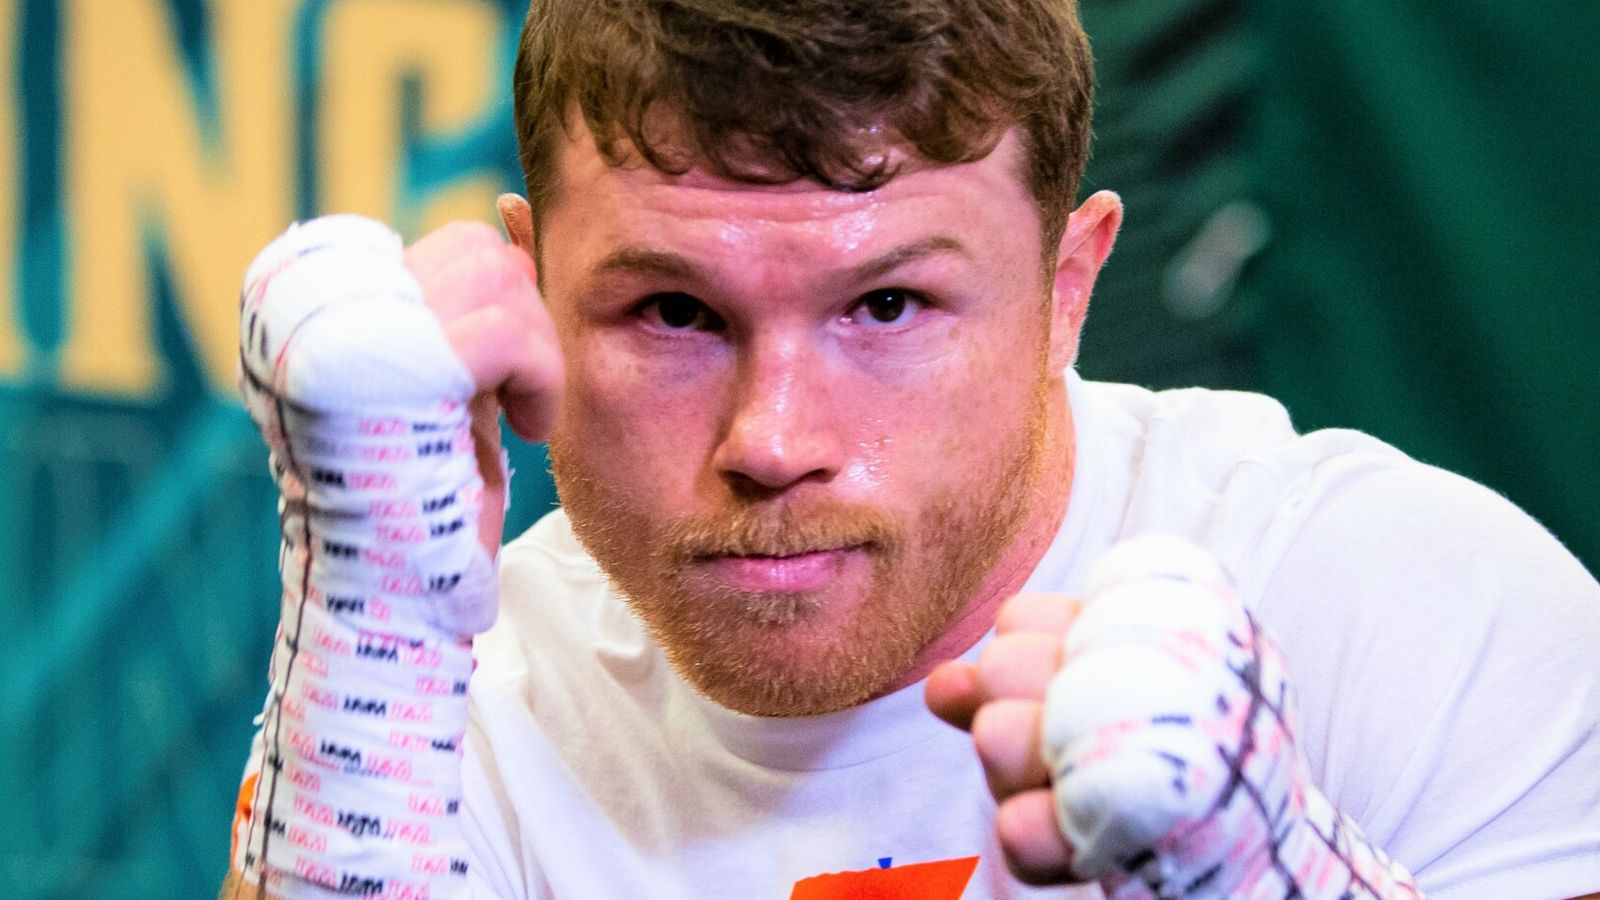 Chris Eubank Jr says a fight with Saul ‘Canelo’ Alvarez can fill the ‘biggest stadium’ in Britain and he’s ‘pushing hard’ to challenge Mexican star